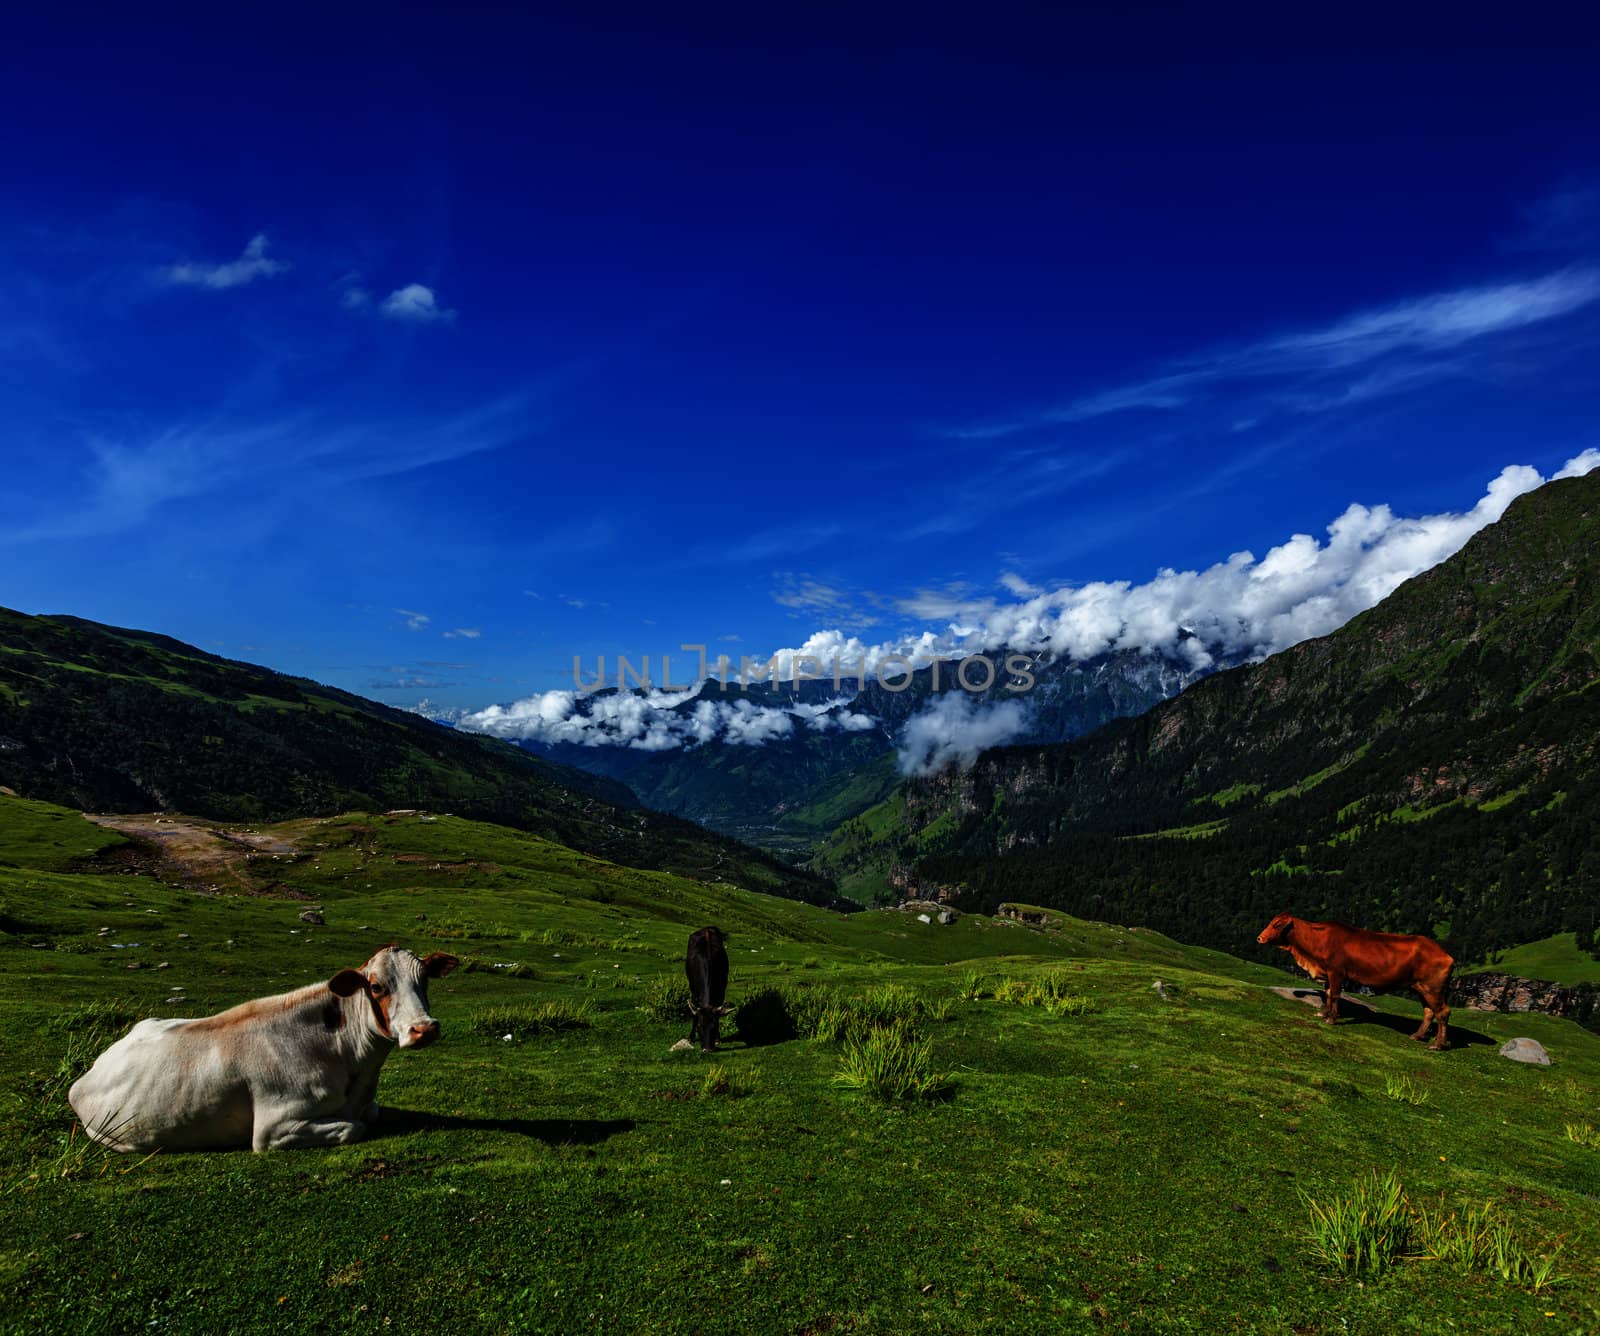 Serene peaceful landscape background - cows grazing on alpine meadow in Himalayas mountains. Himachal Pradesh, India